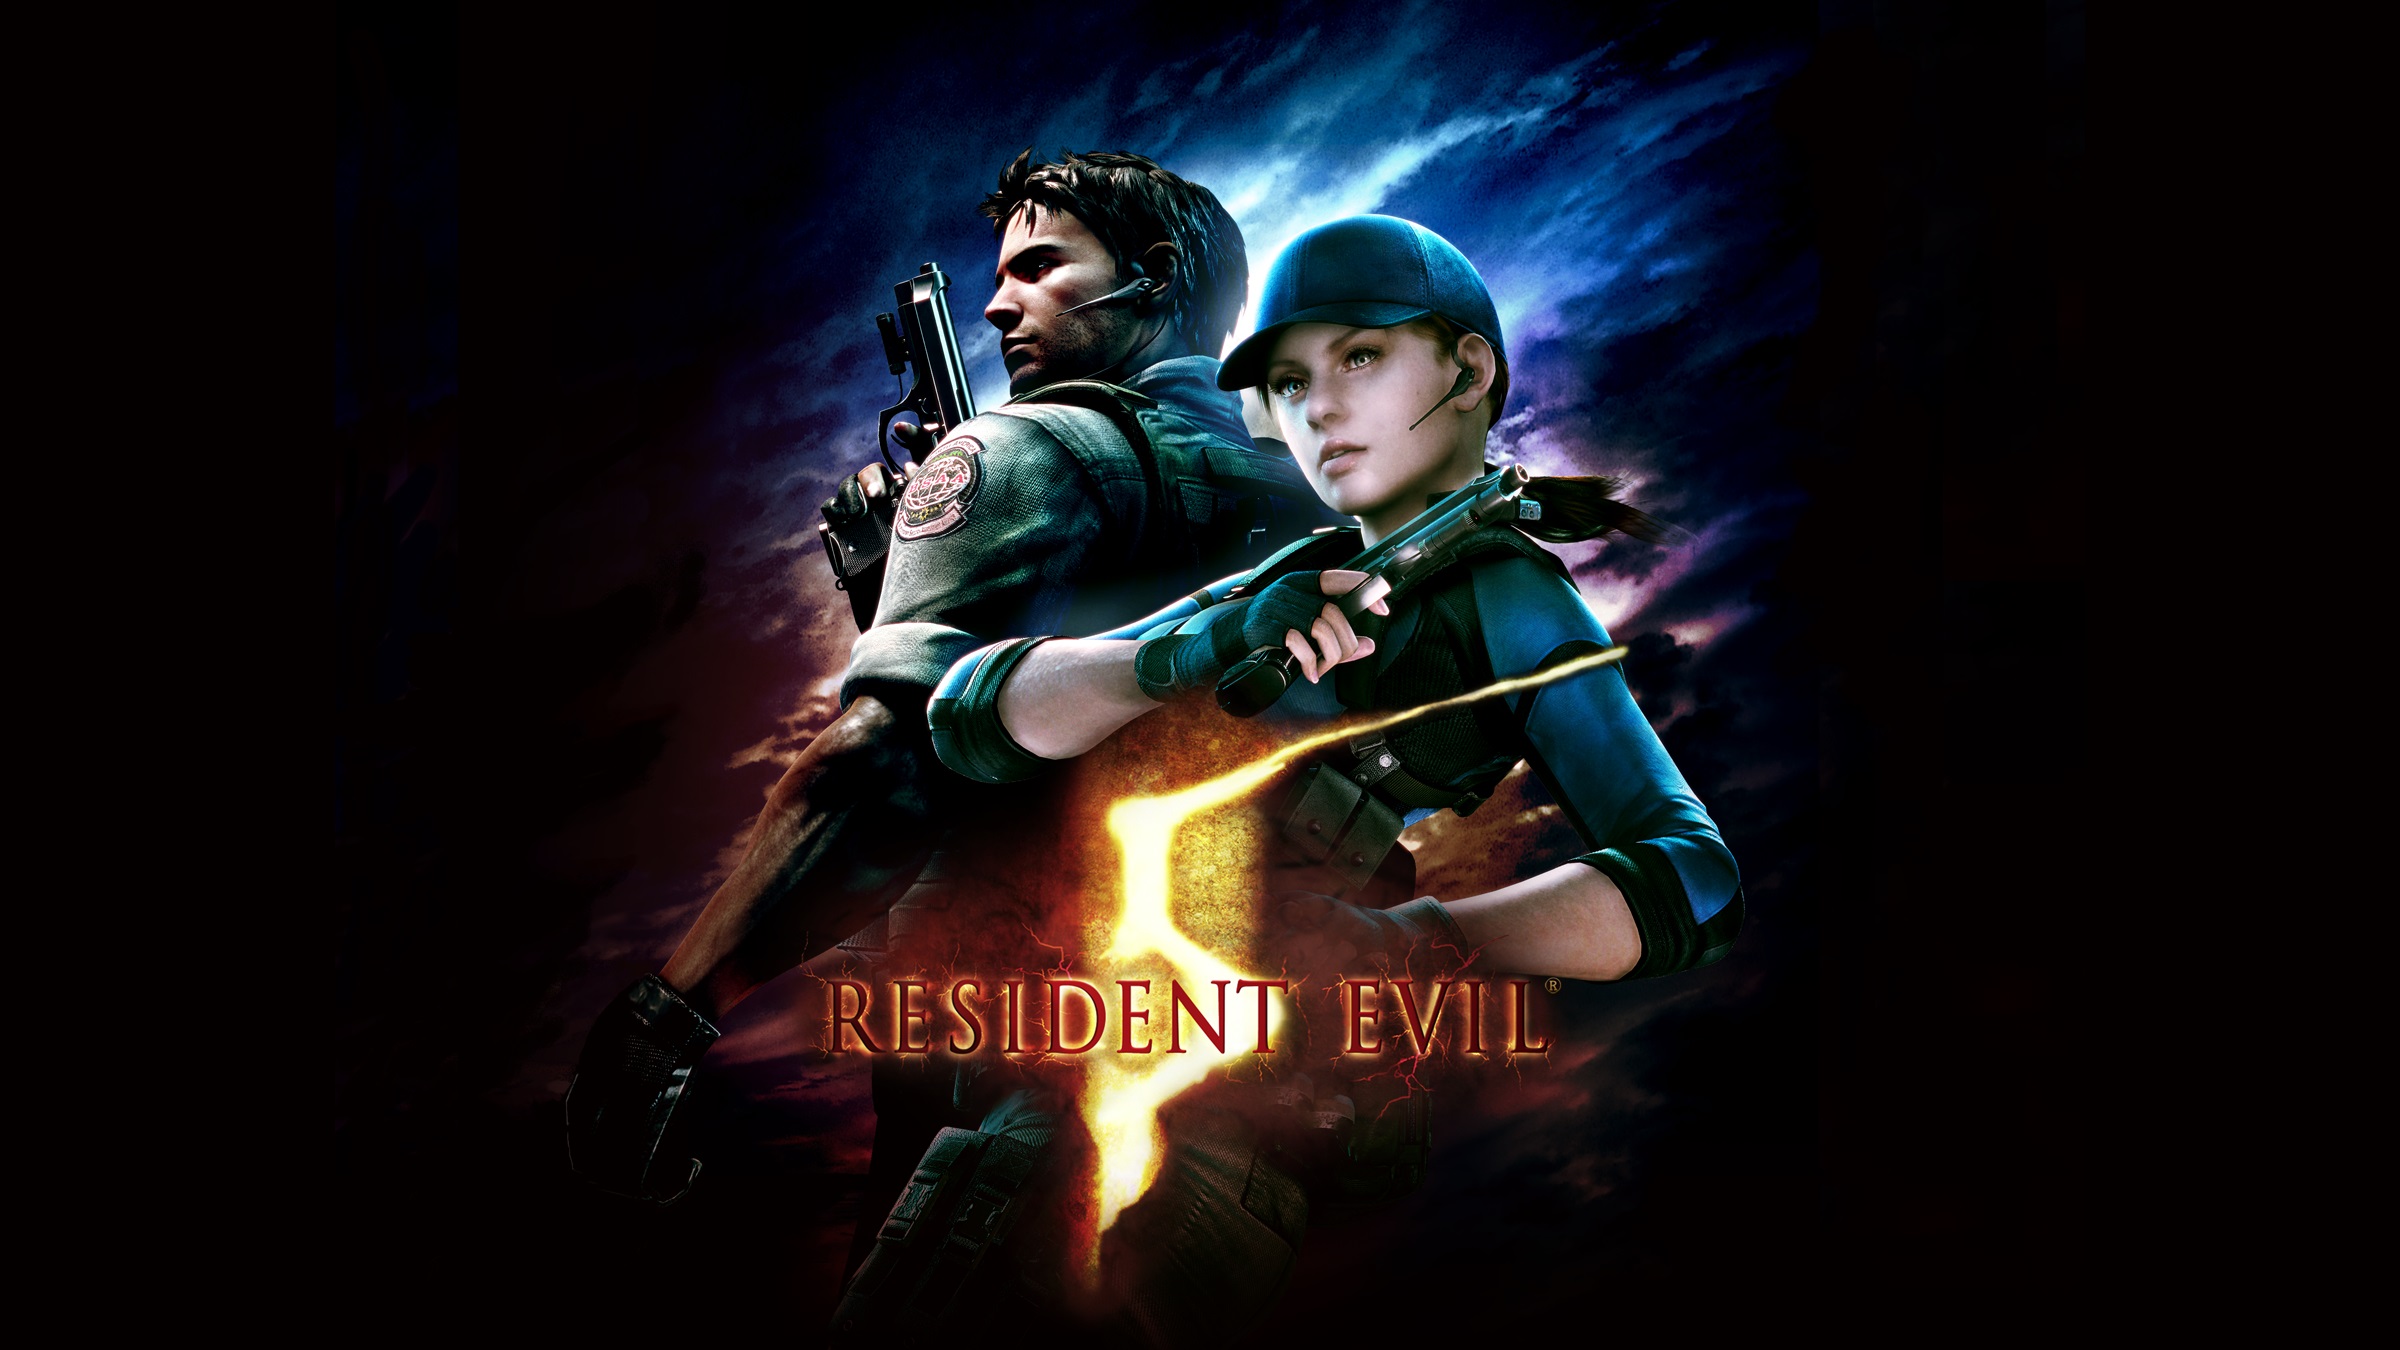 resident-evil-5-6-coming-to-switch-on-october-29-just-in-time-for-halloween-neogaf